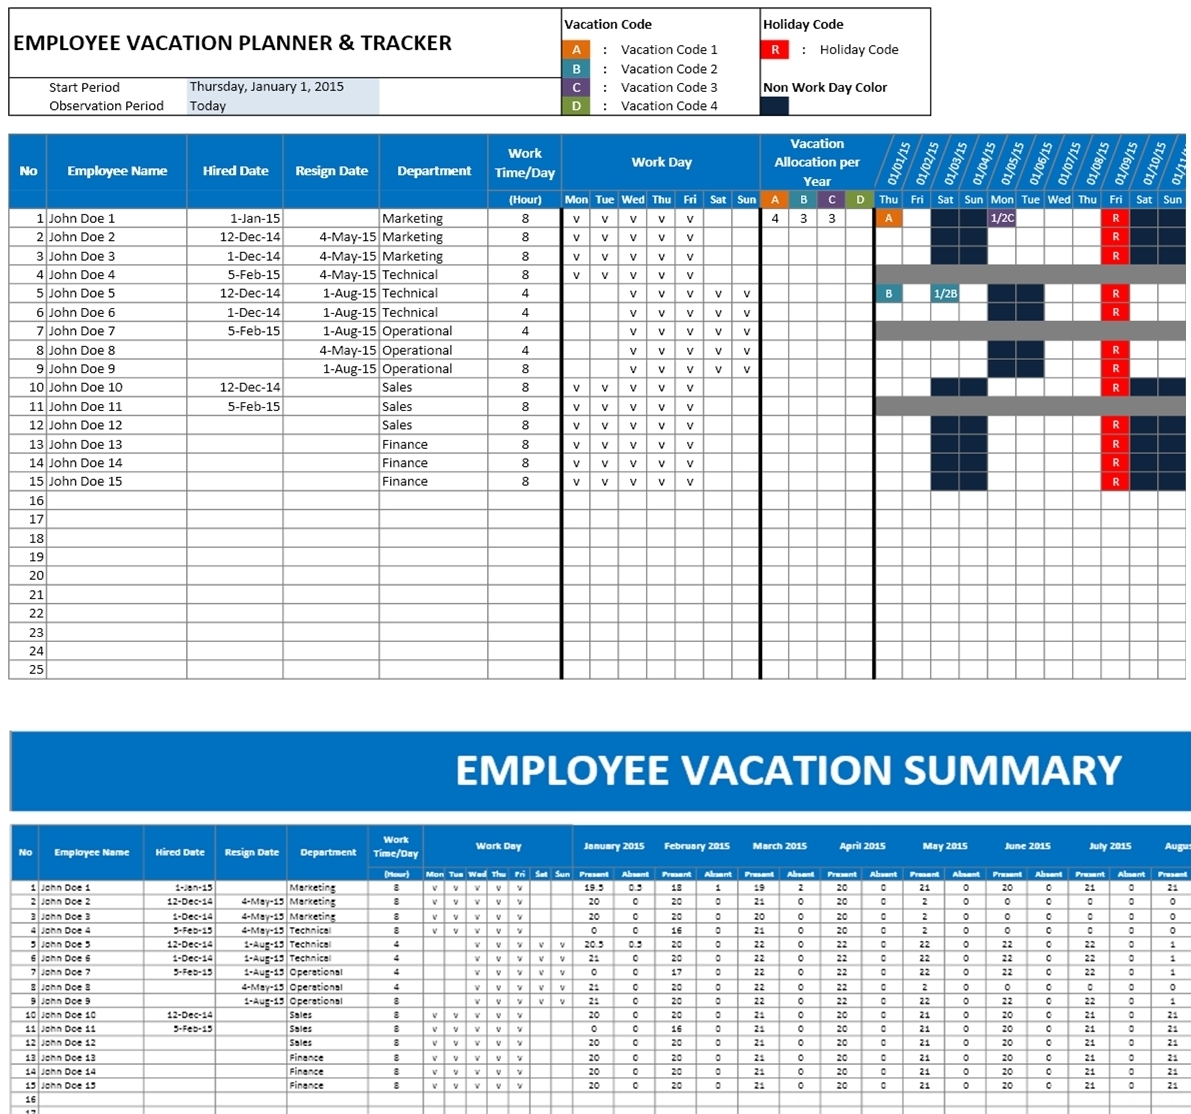 Employee Vacation Tracker & Dashboard using MS Excel | Chandoo.